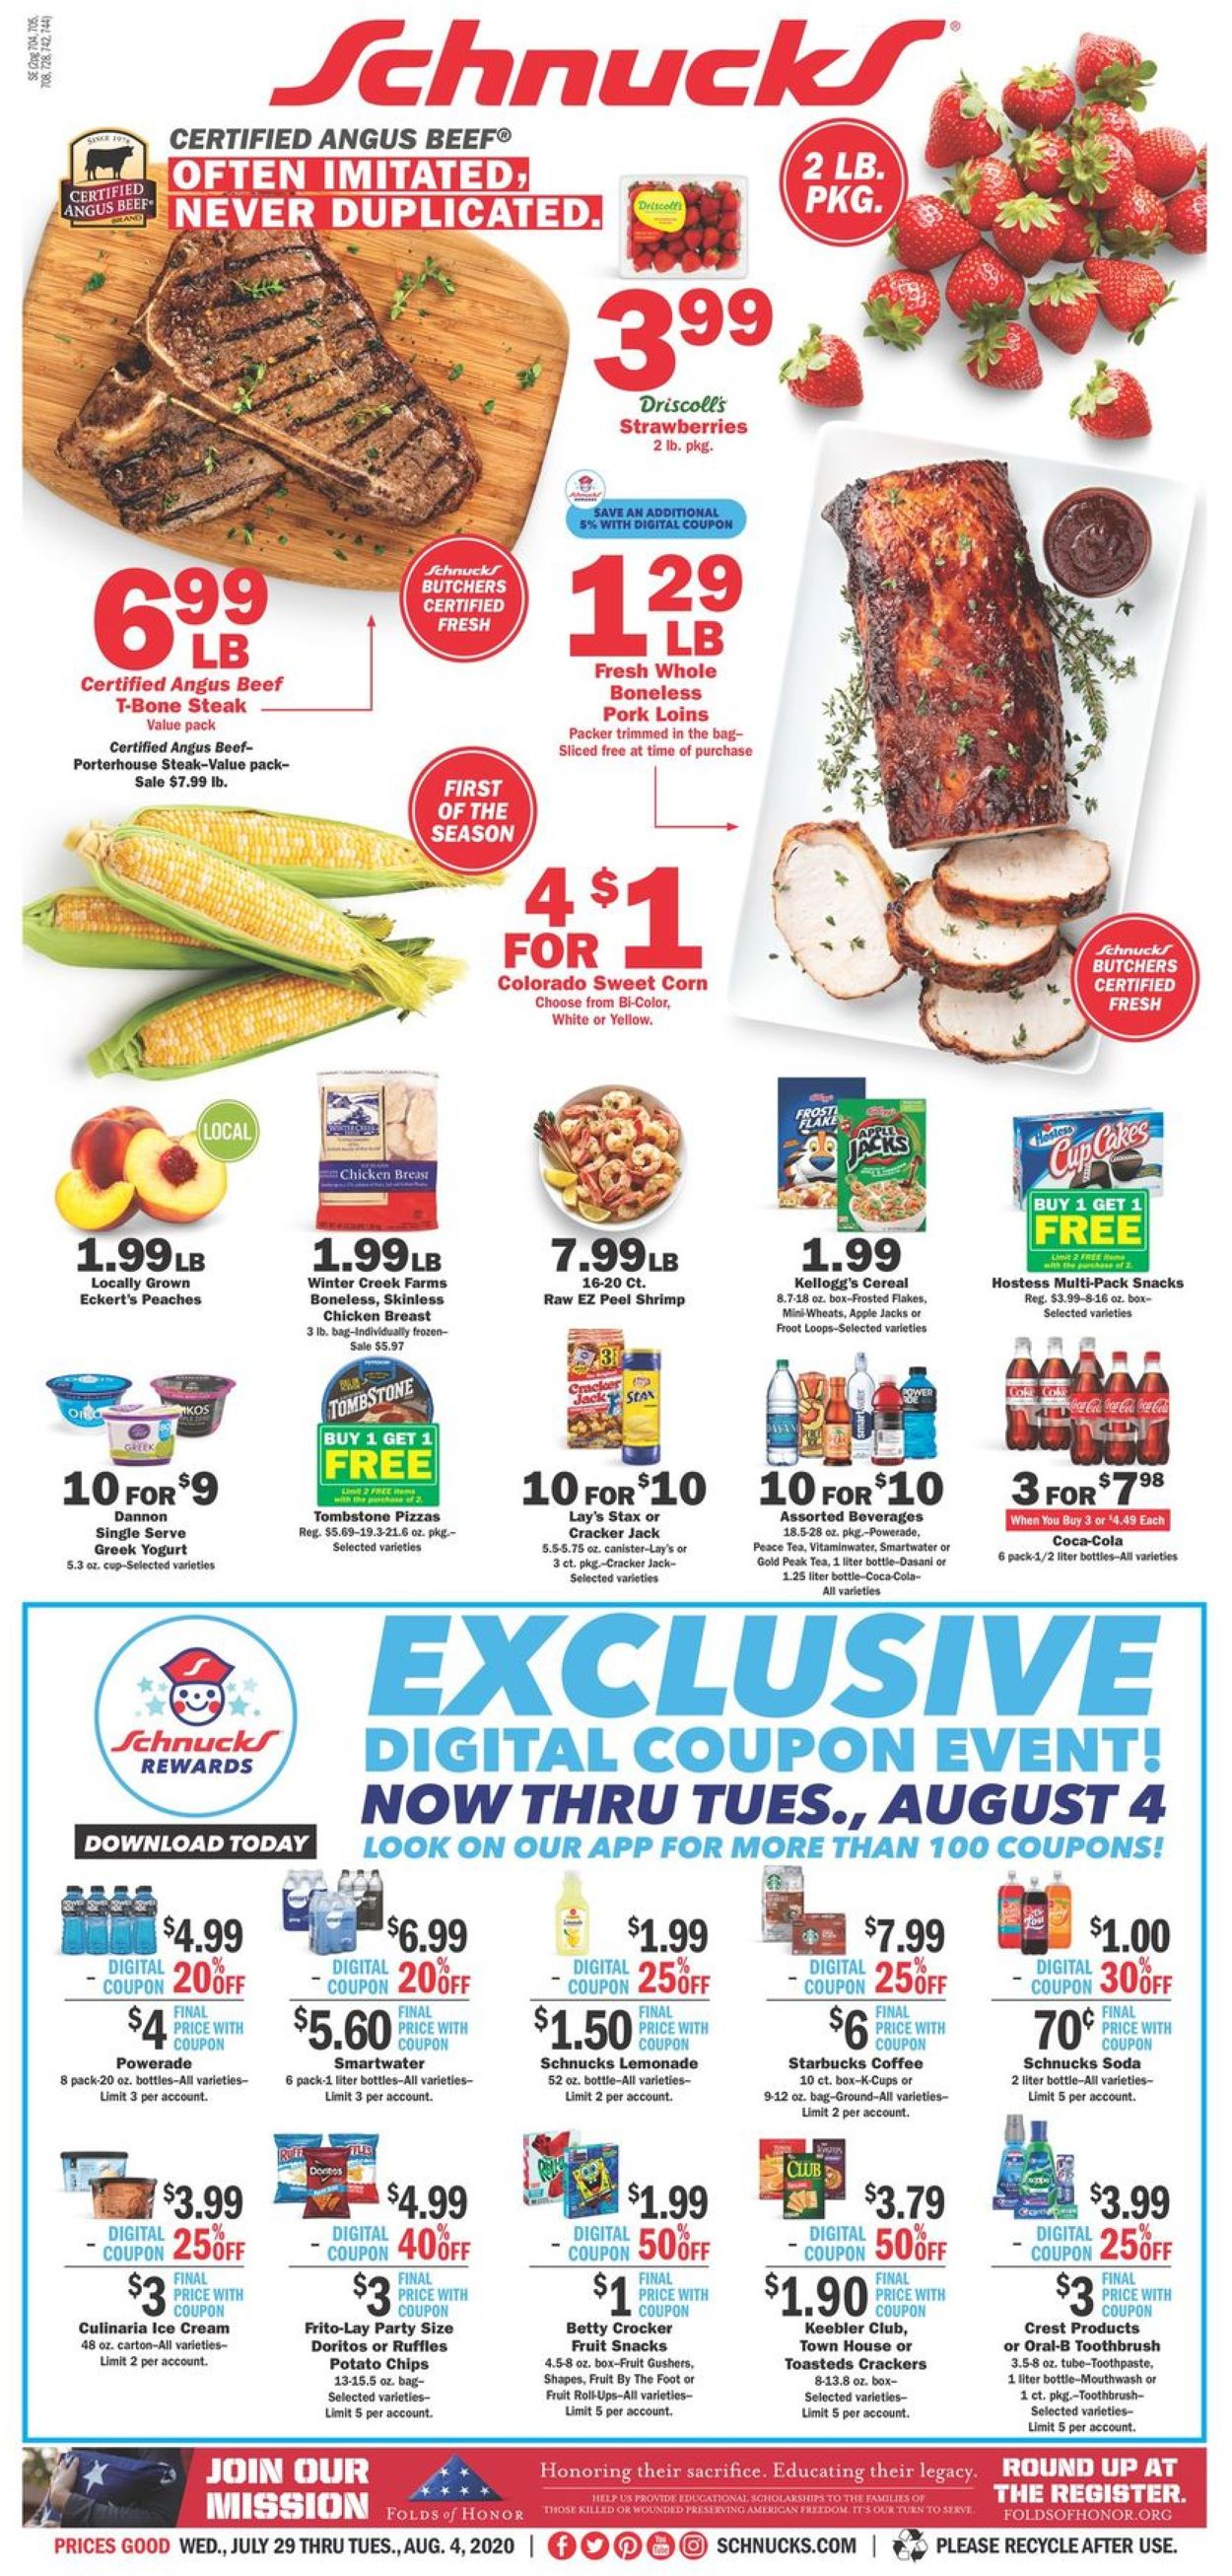 Schnucks Current weekly ad 07/29 - 08/04/2020 - frequent-ads.com